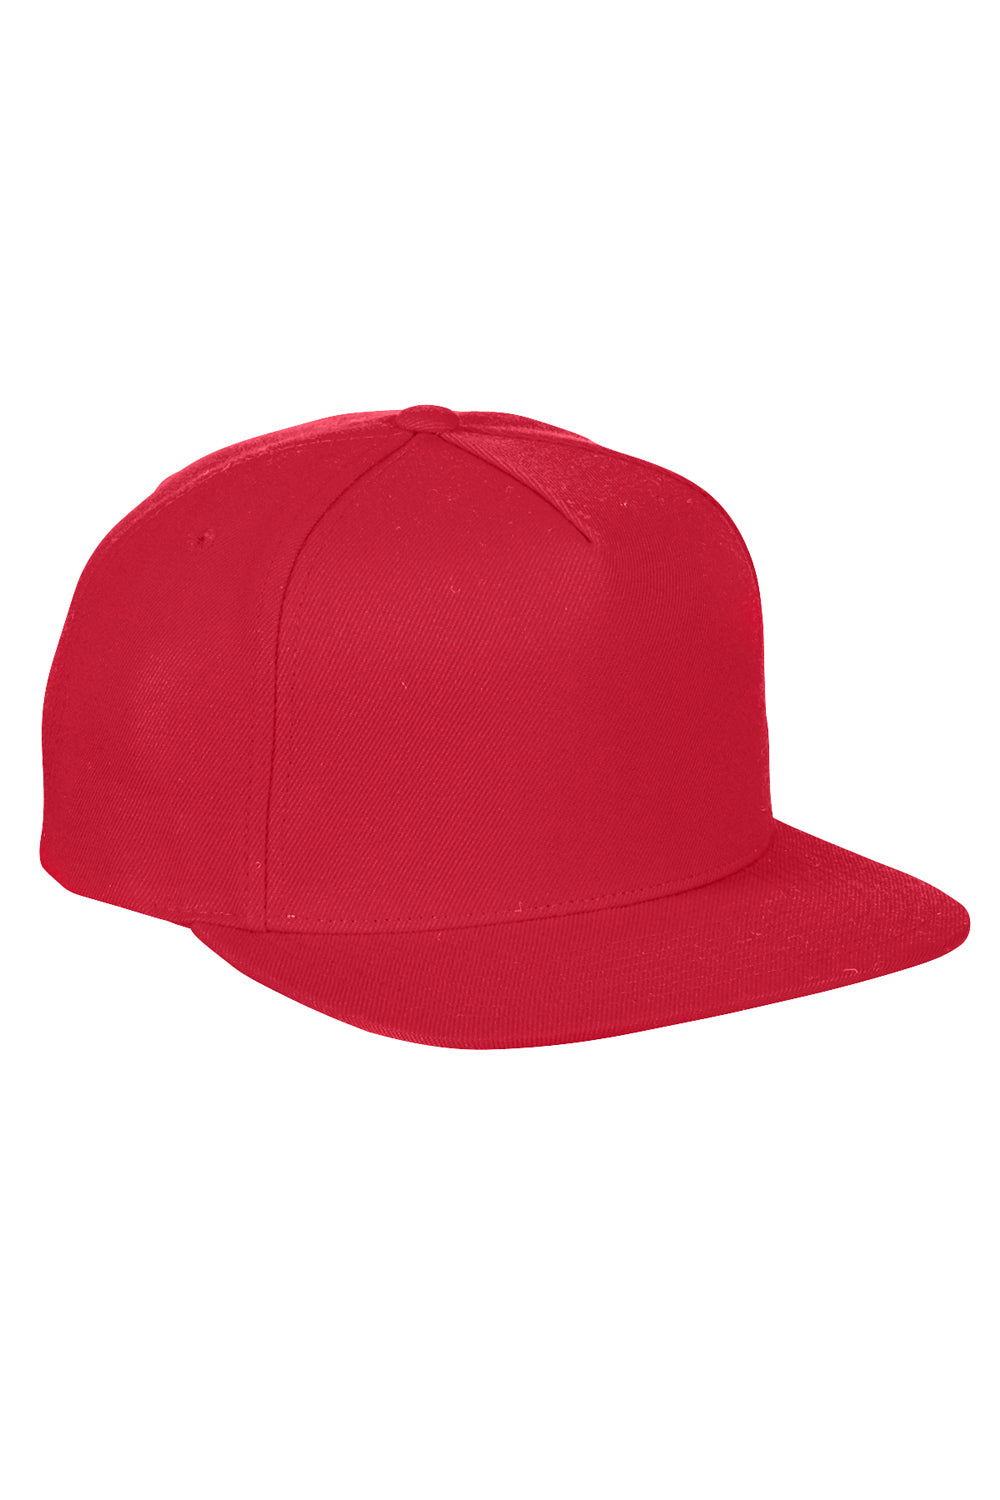 Yupoong YP5089 Mens Adjustable Hat Red Front